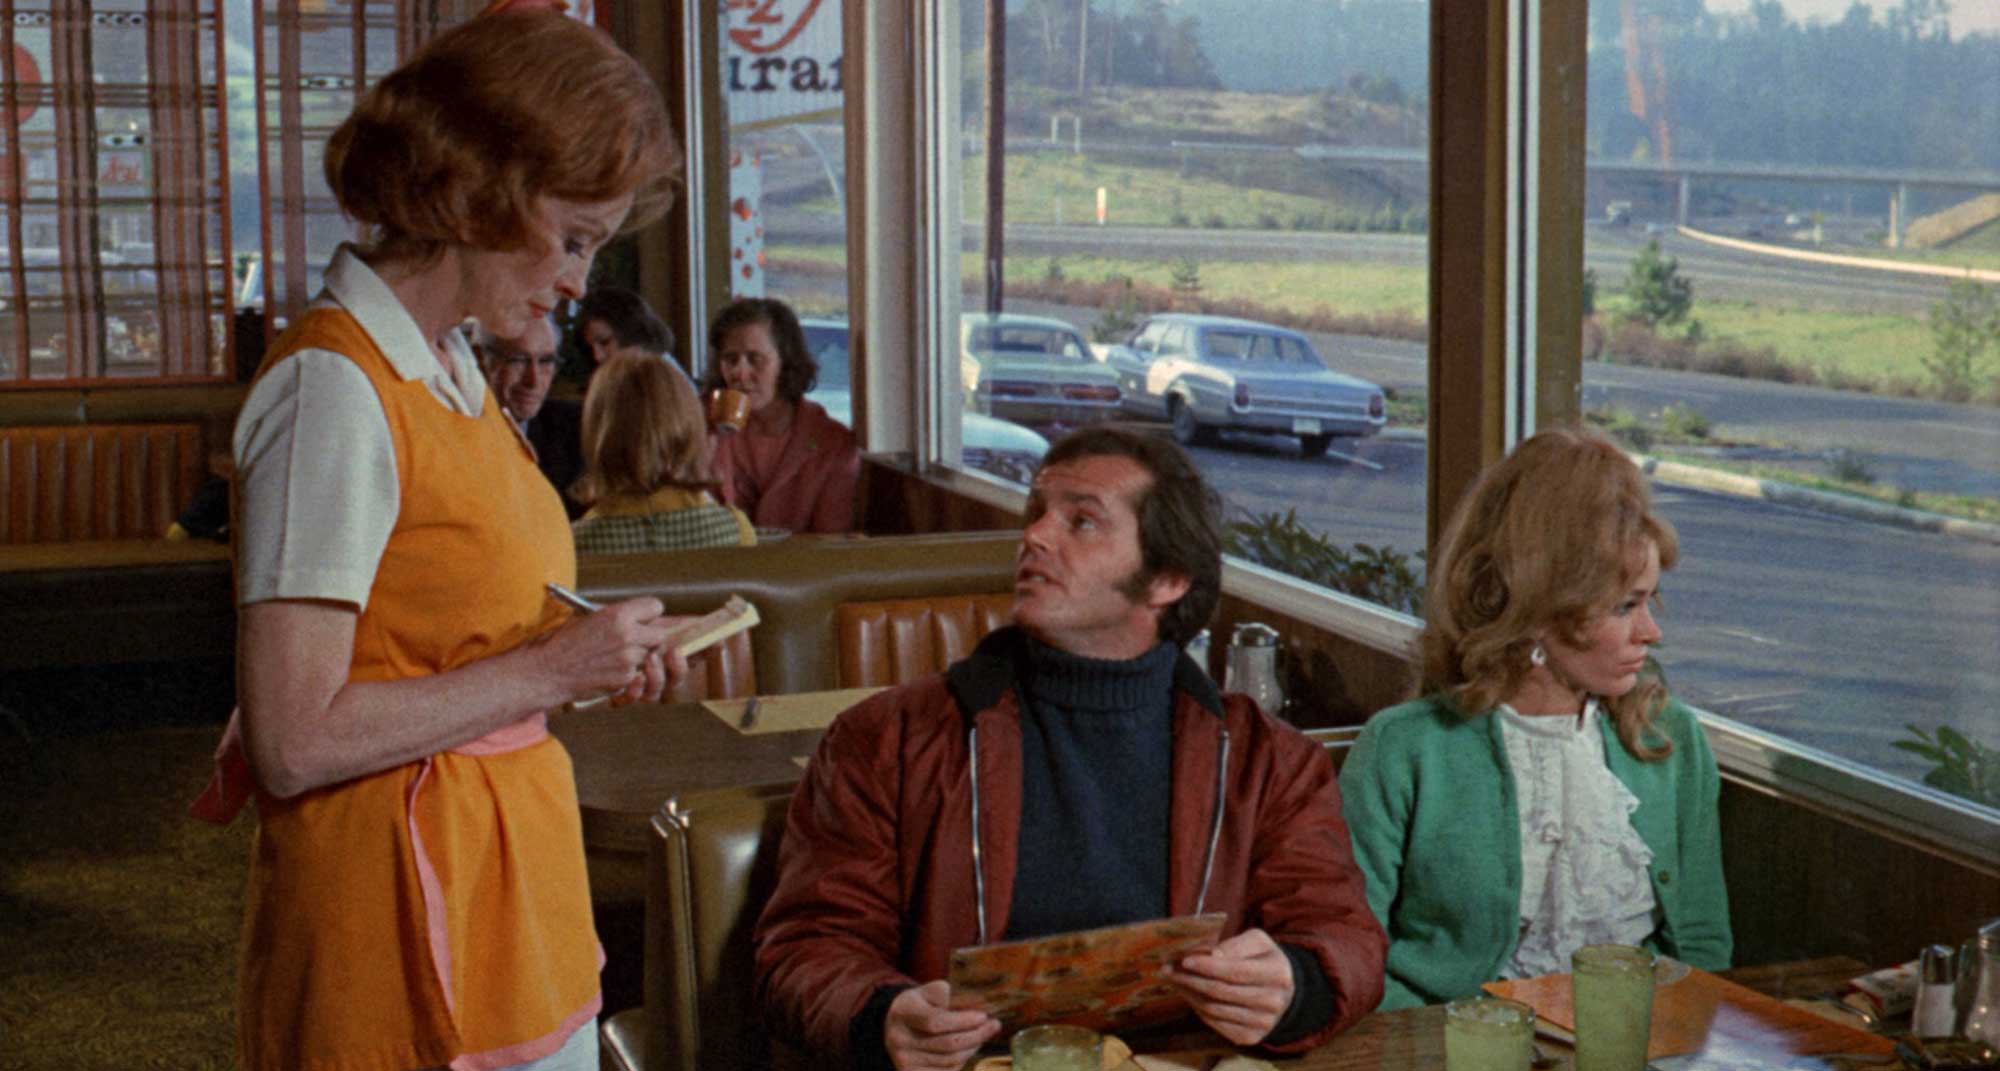 How the Actor Jack Nicholson Used Creativity in the Movie “Five Easy Pieces”